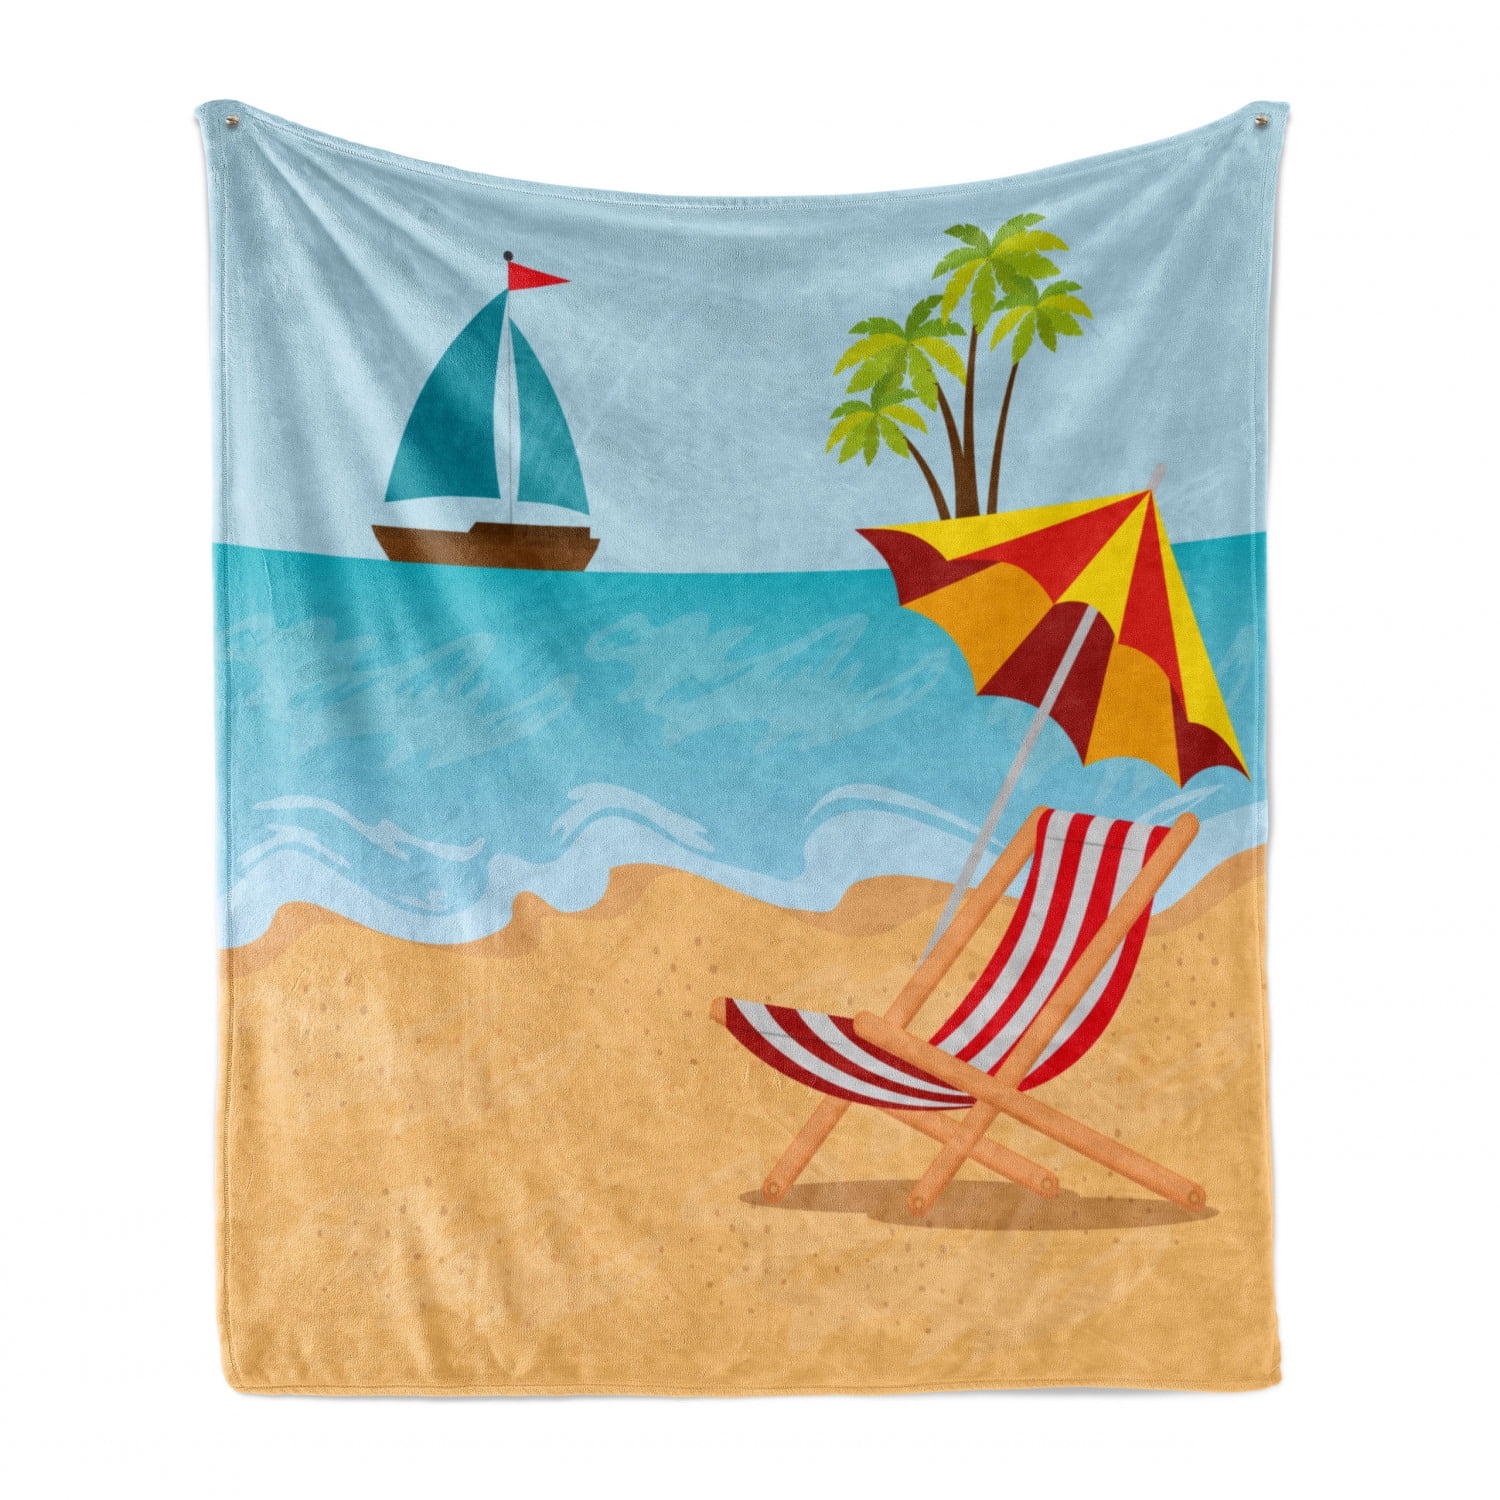 Aerial View Cartoon of Summer Holiday Fun with Parasols and Towels with Ocean Ambesonne Graphic Beach Soft Flannel Fleece Throw Blanket Cozy Plush for Indoor and Outdoor Use 50 x 70 Multicolor